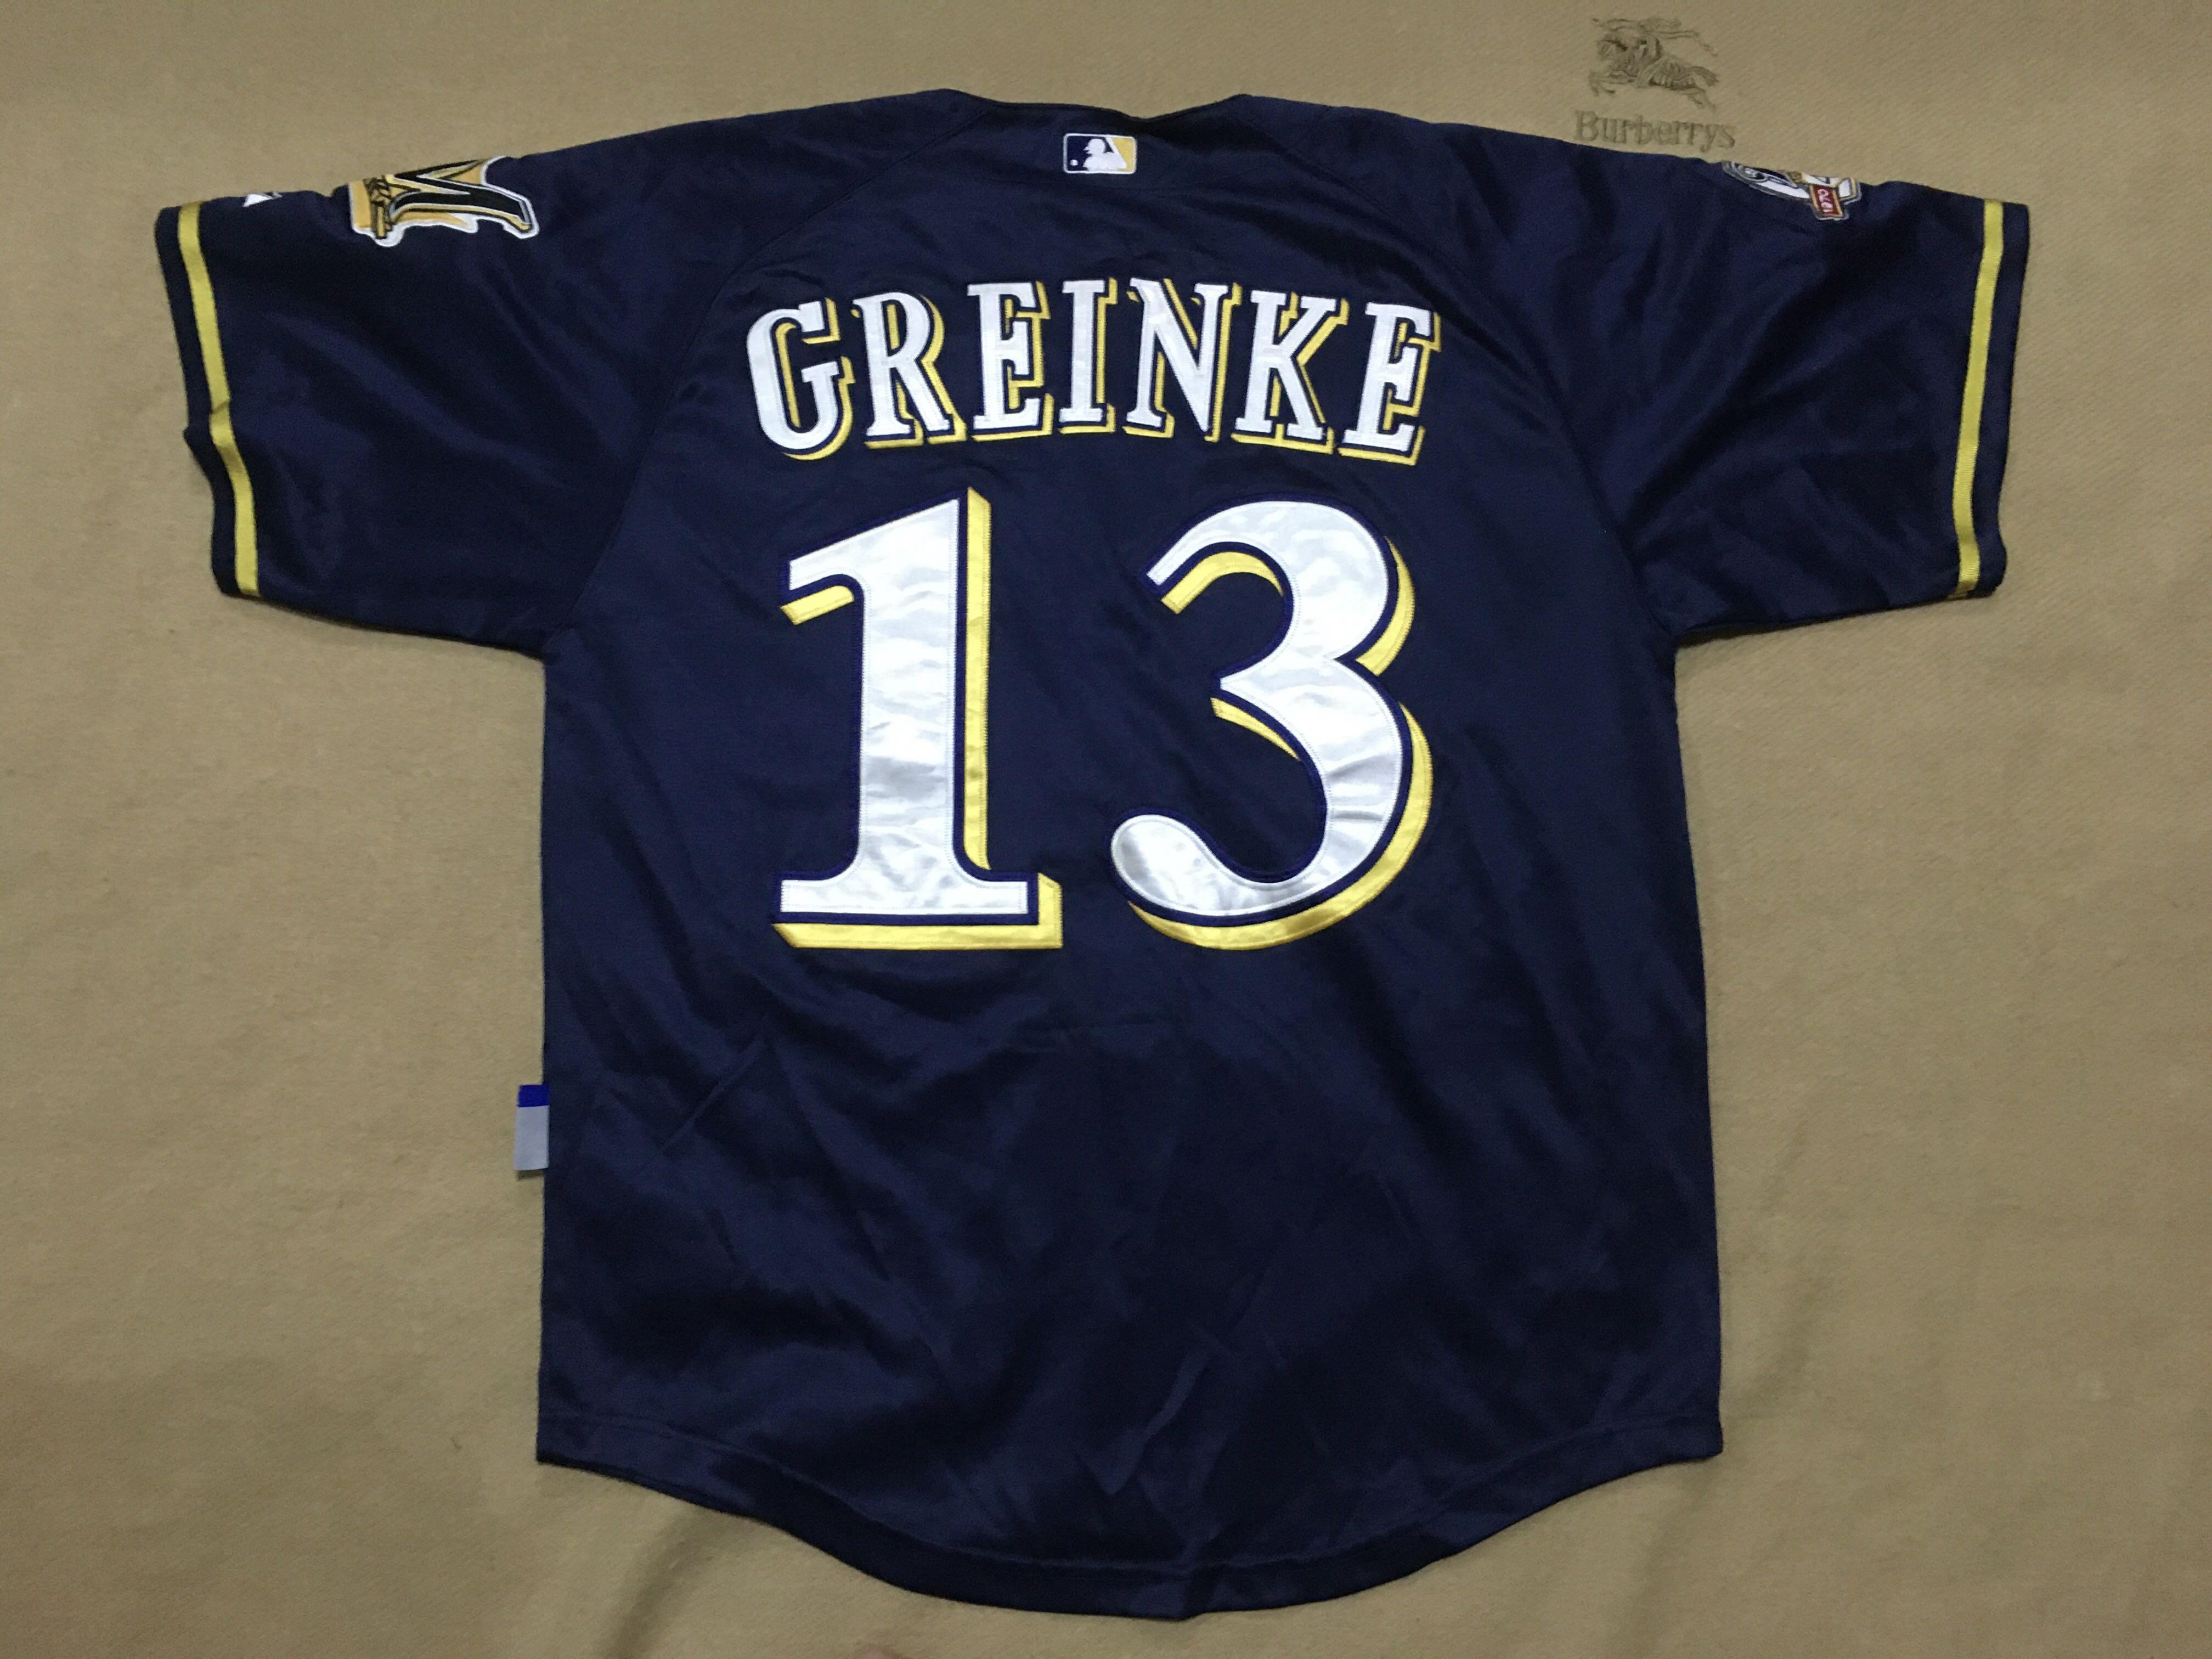 00's Milwaukee Brewers Authentic Majestic MLB Jersey Size 48 XL